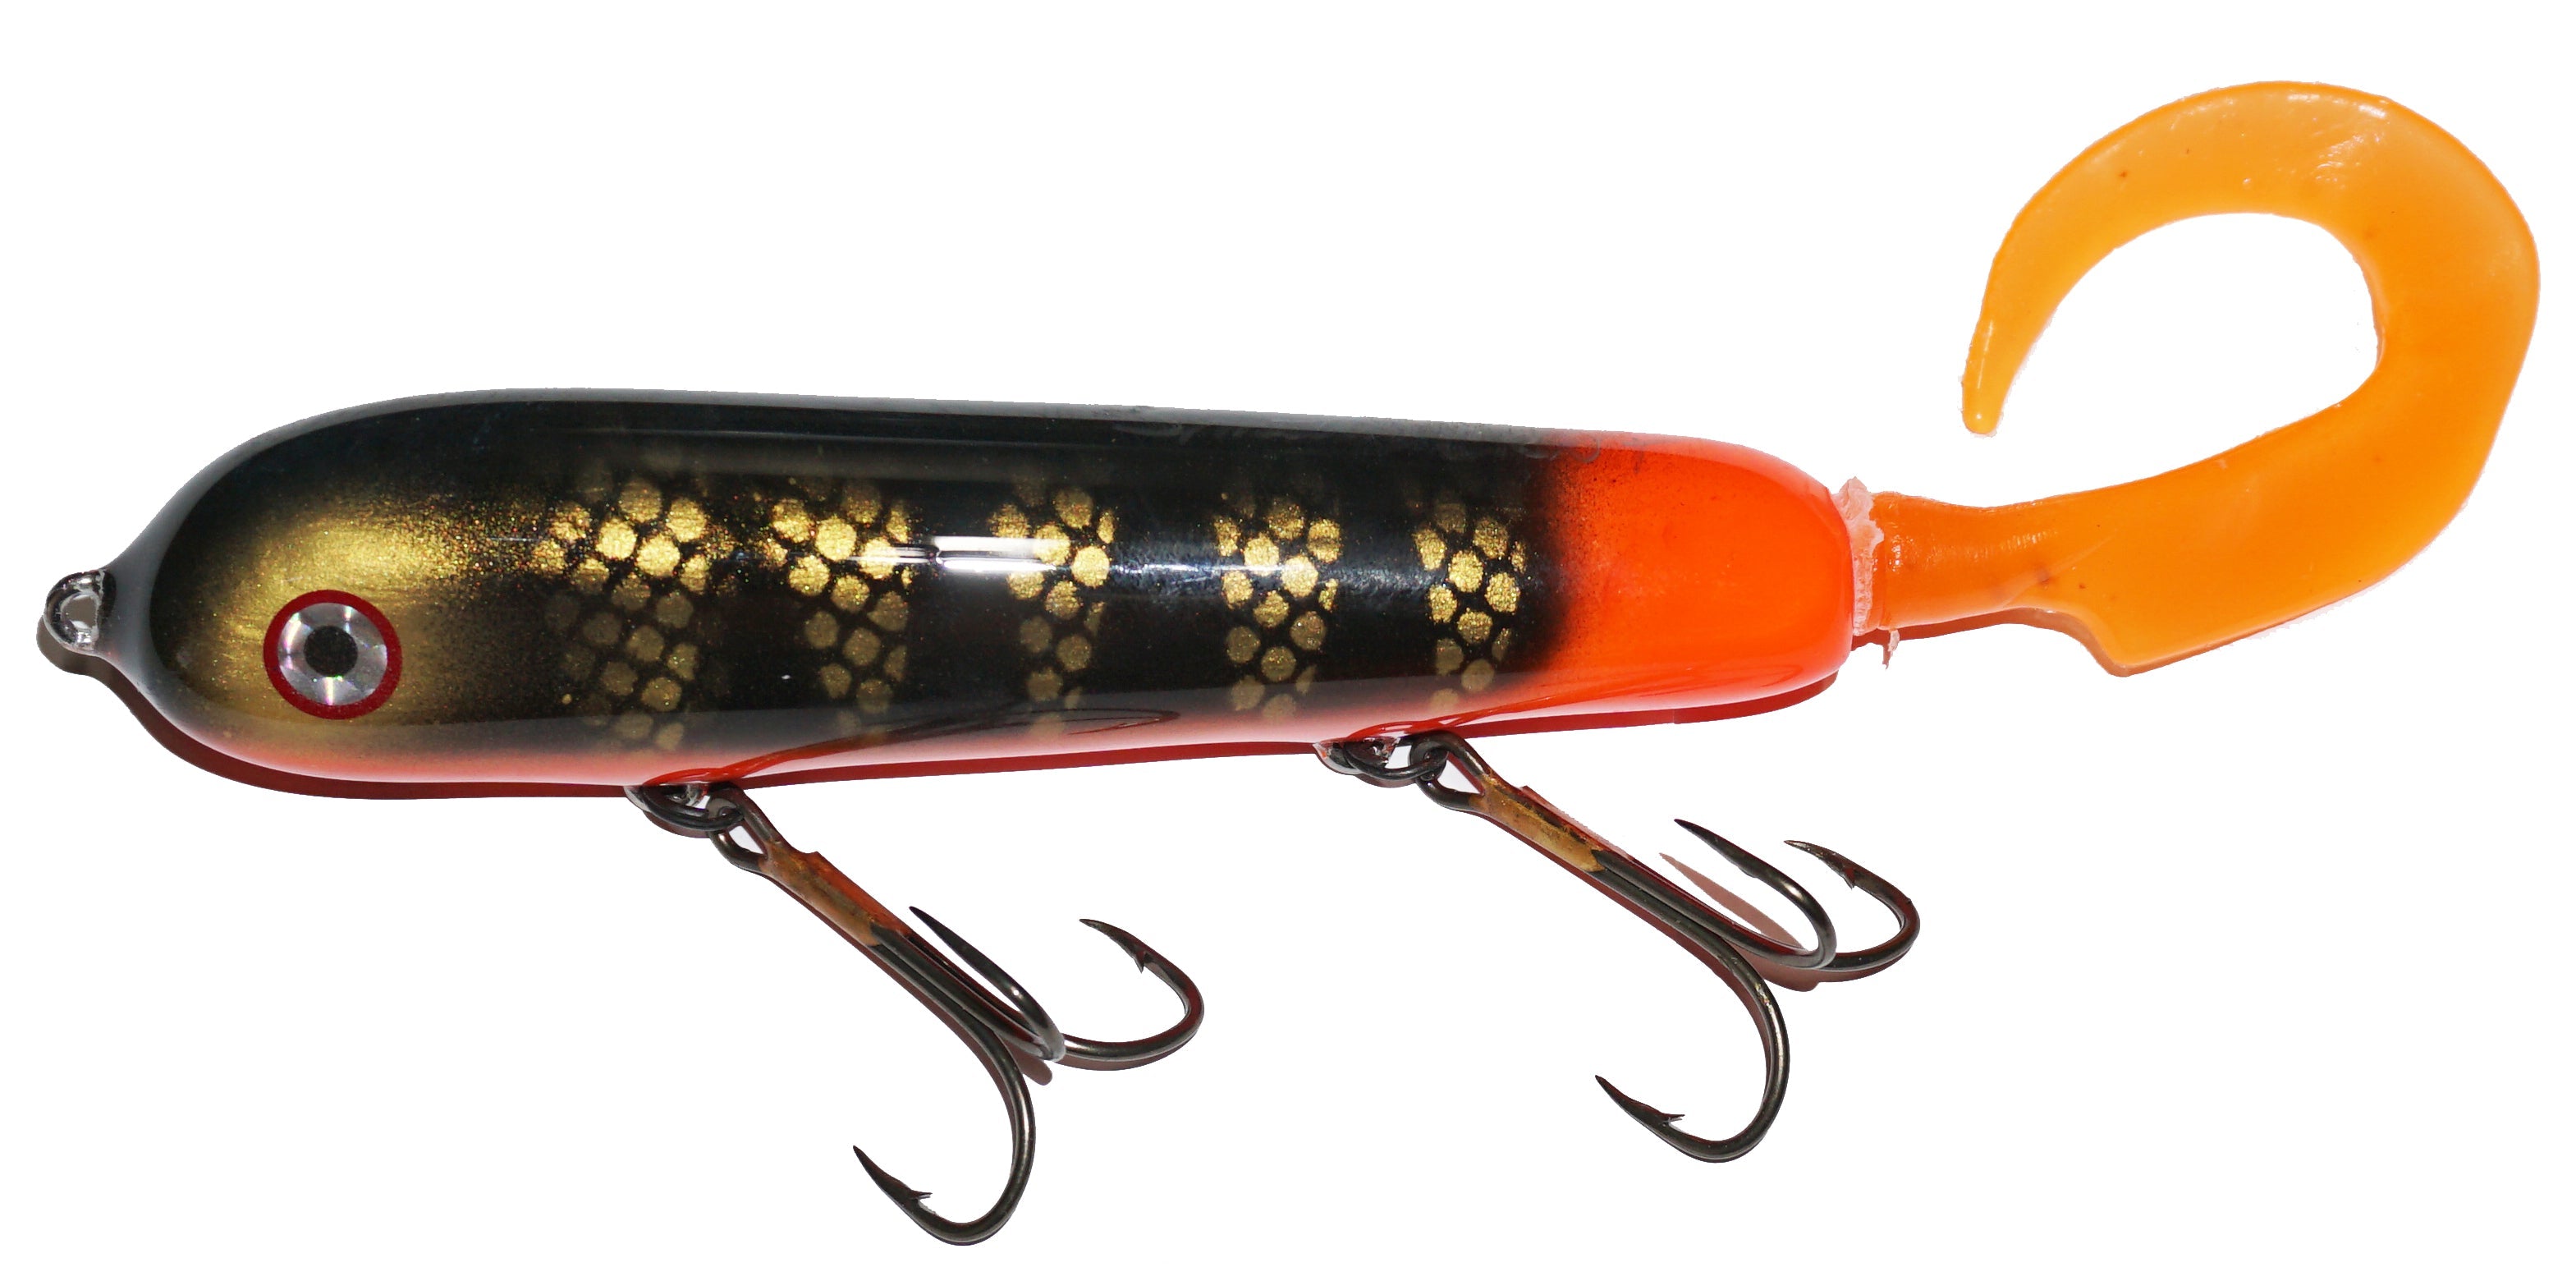 Smuttly Dog Baits 12 Big N Musky Glide Bait Color: Goldfish Sucker13.8  OuncesGreat Wide Glide Of Appox. 3 feet, Good Belly Roll On The Twitch, Can  Be Worked At Any SpeedExcellent Quality